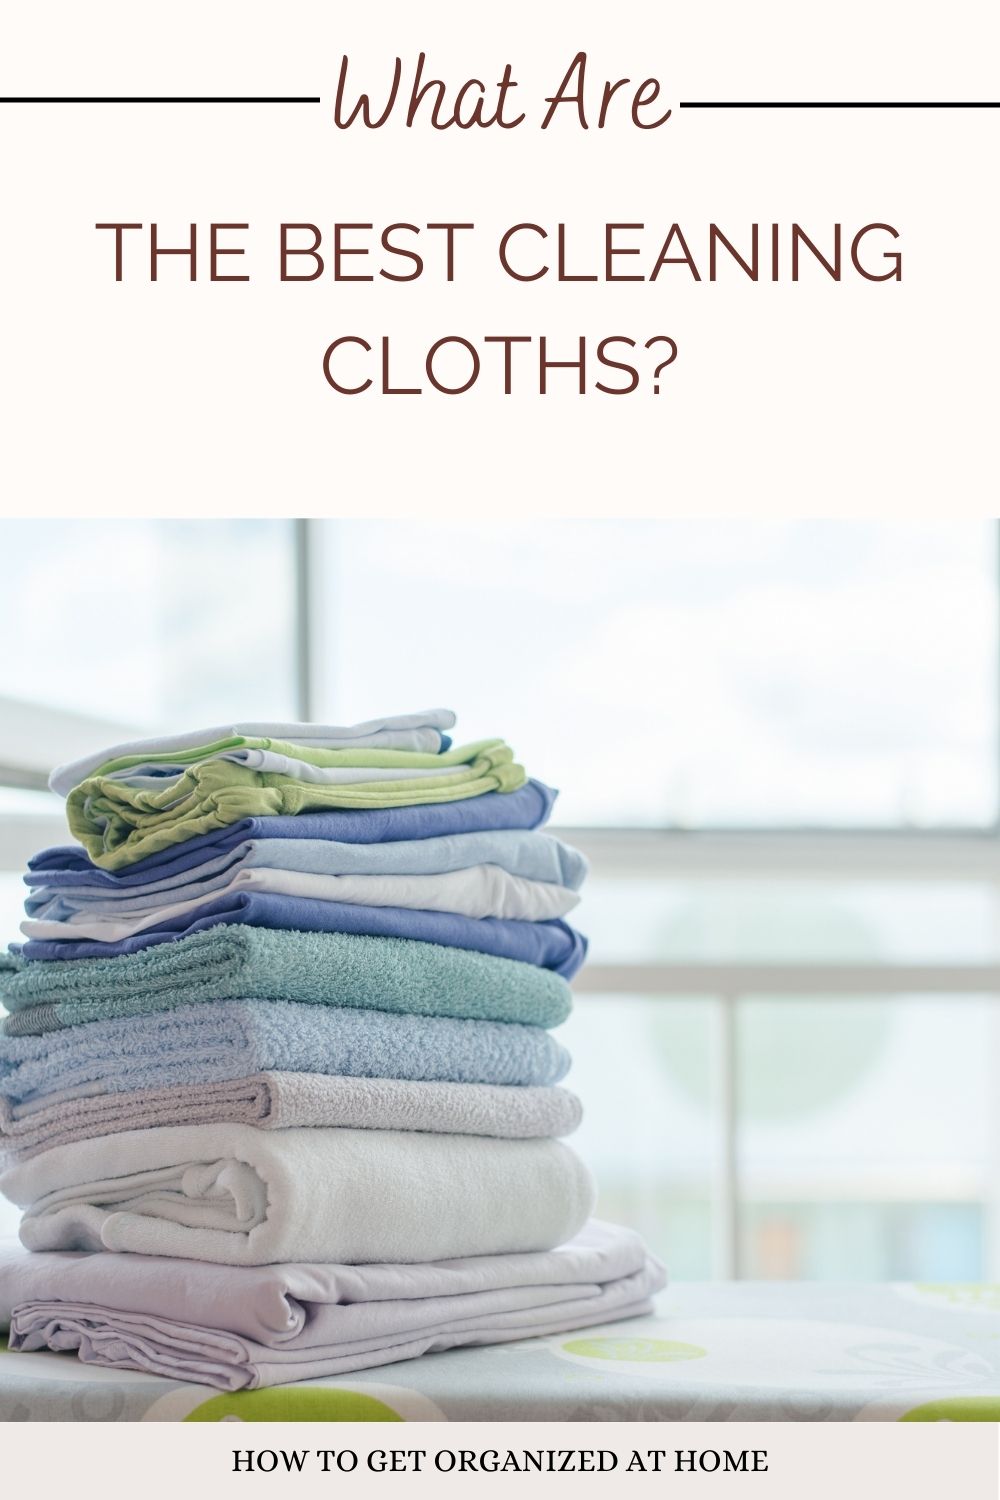 What Are The Best Cleaning Cloths?